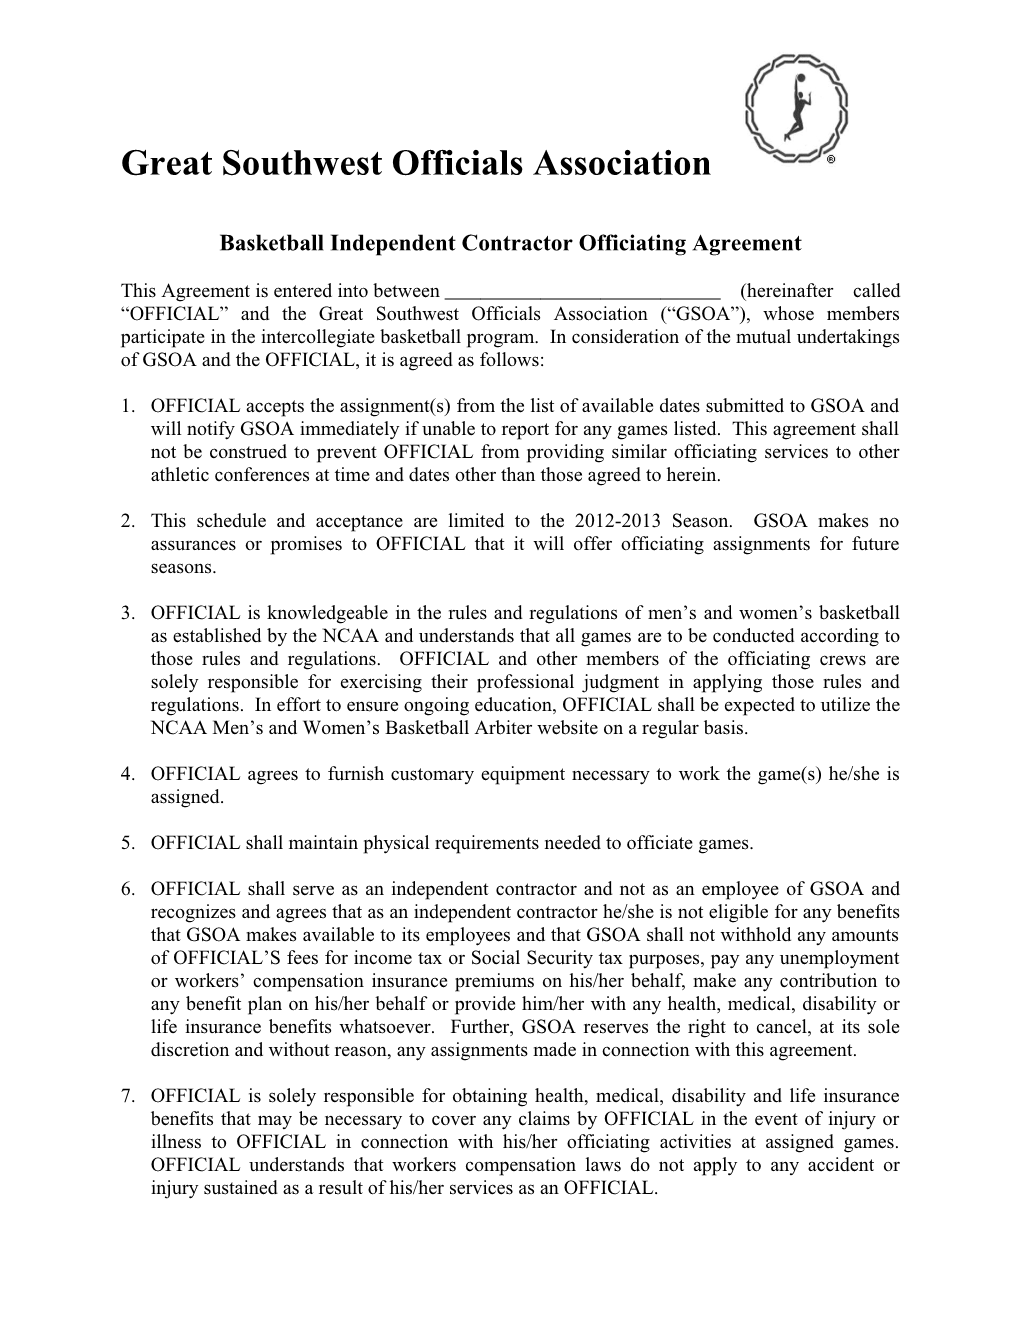 Basketball Independent Contractor Officiating Agreement